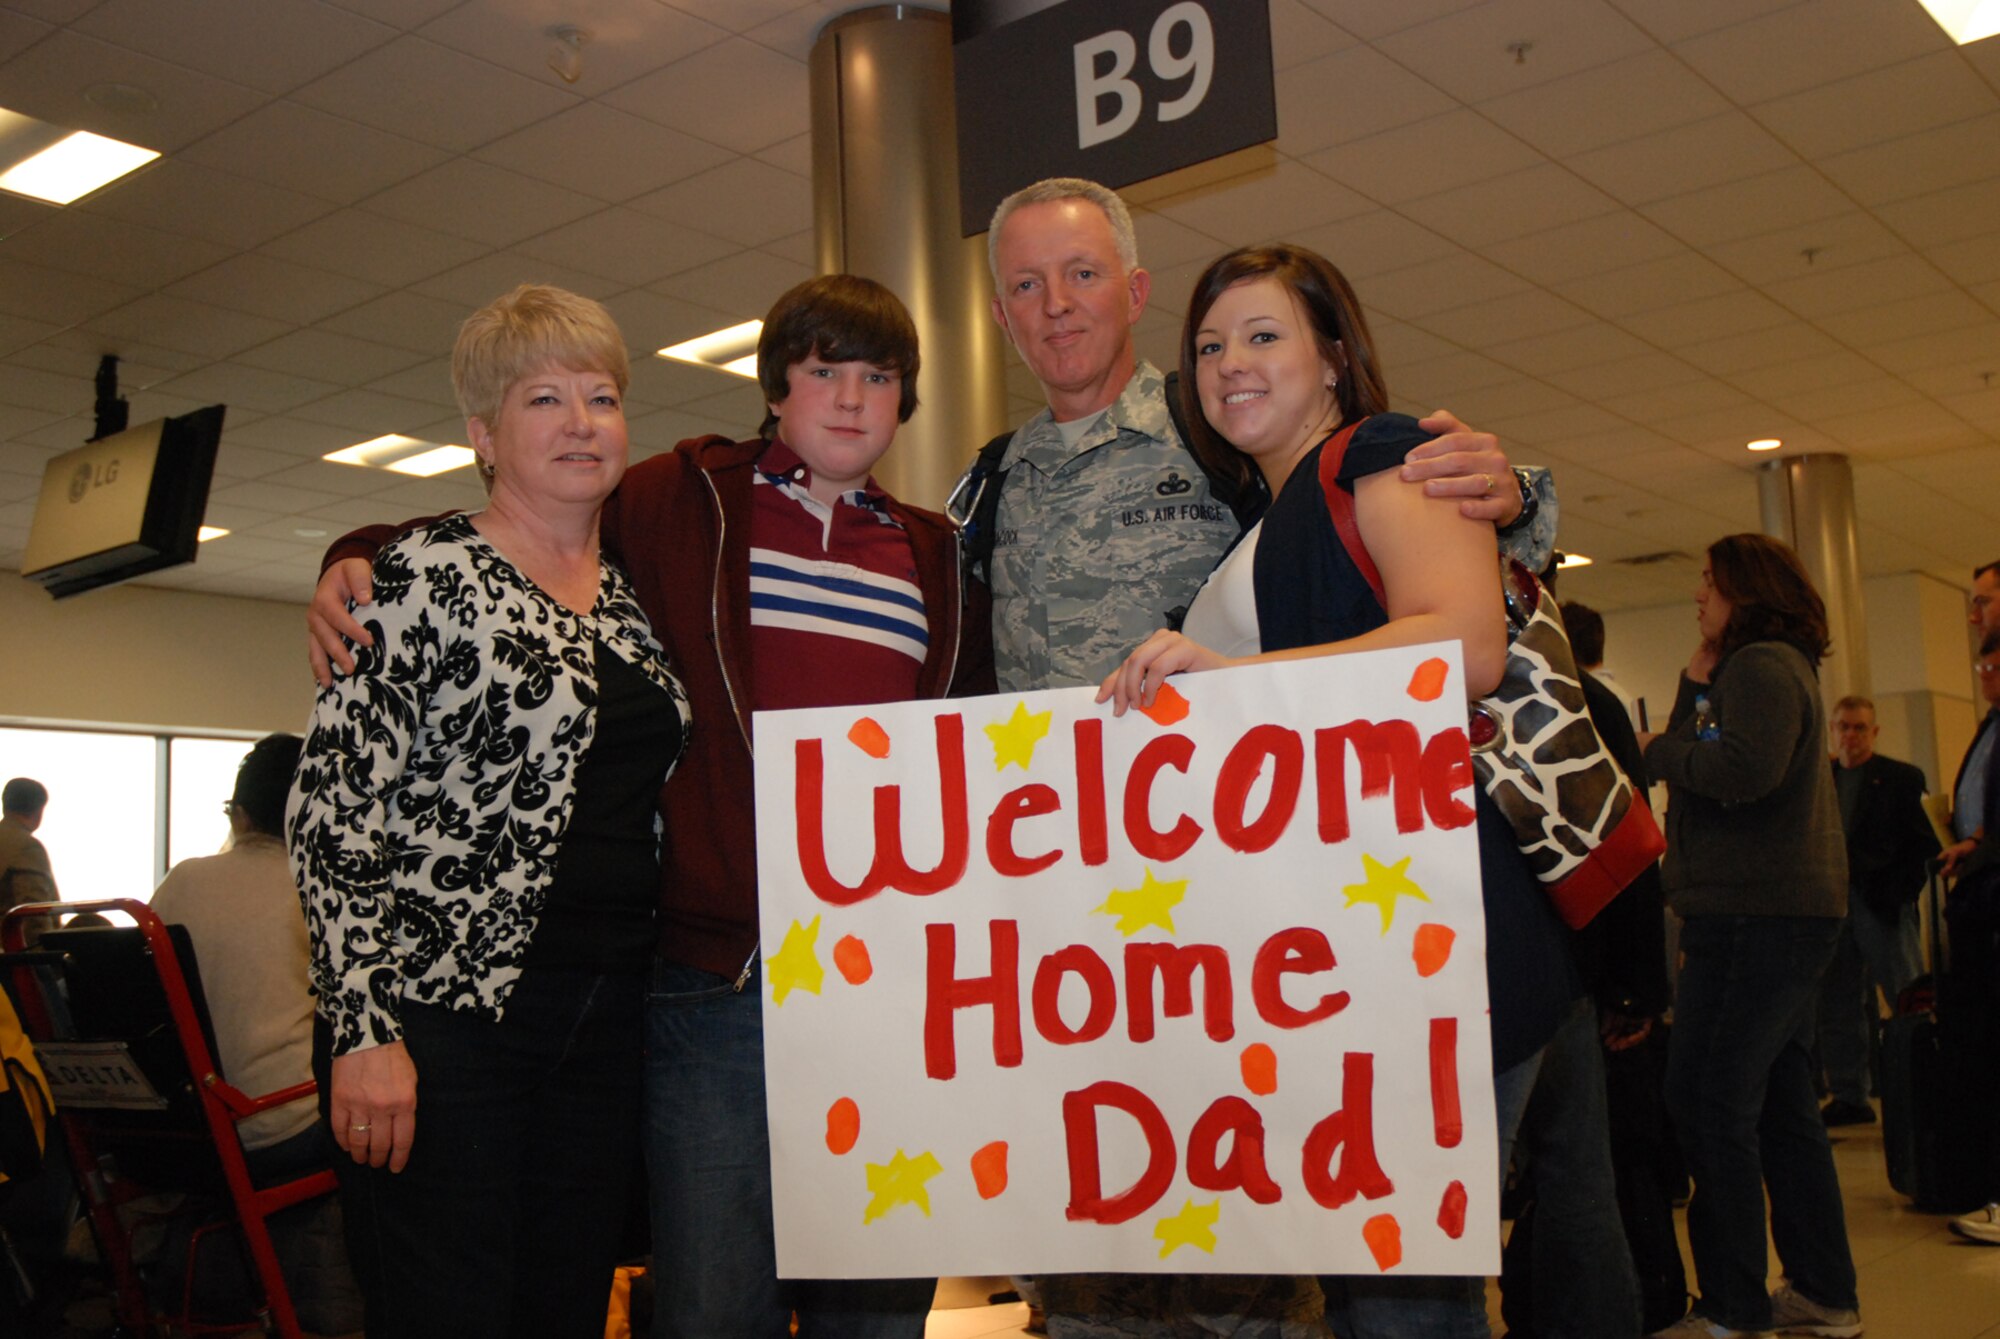 Chief Master Sgt. Wendell Peacock, 94th Security Forces Squadron, takes a photo with his family - wife, Janet, son, Andrew and daughter, Meagan - at the Atlanta Hartsfield-Jackson Airport Jan. 5. Chief Peacock and five other Security Forces Airmen returned home Jan. 5 from a six-month deployment to Southwest Asia in support of Operation Iraqi Freedom. The reserve Airmen defended their base through gate checks and random anti-terrorism measures. Chief Peacock said the deployment was hard because he missed his 25th wedding anniversary. (U.S. Air Force photo/Master Sgt. Stan Coleman)